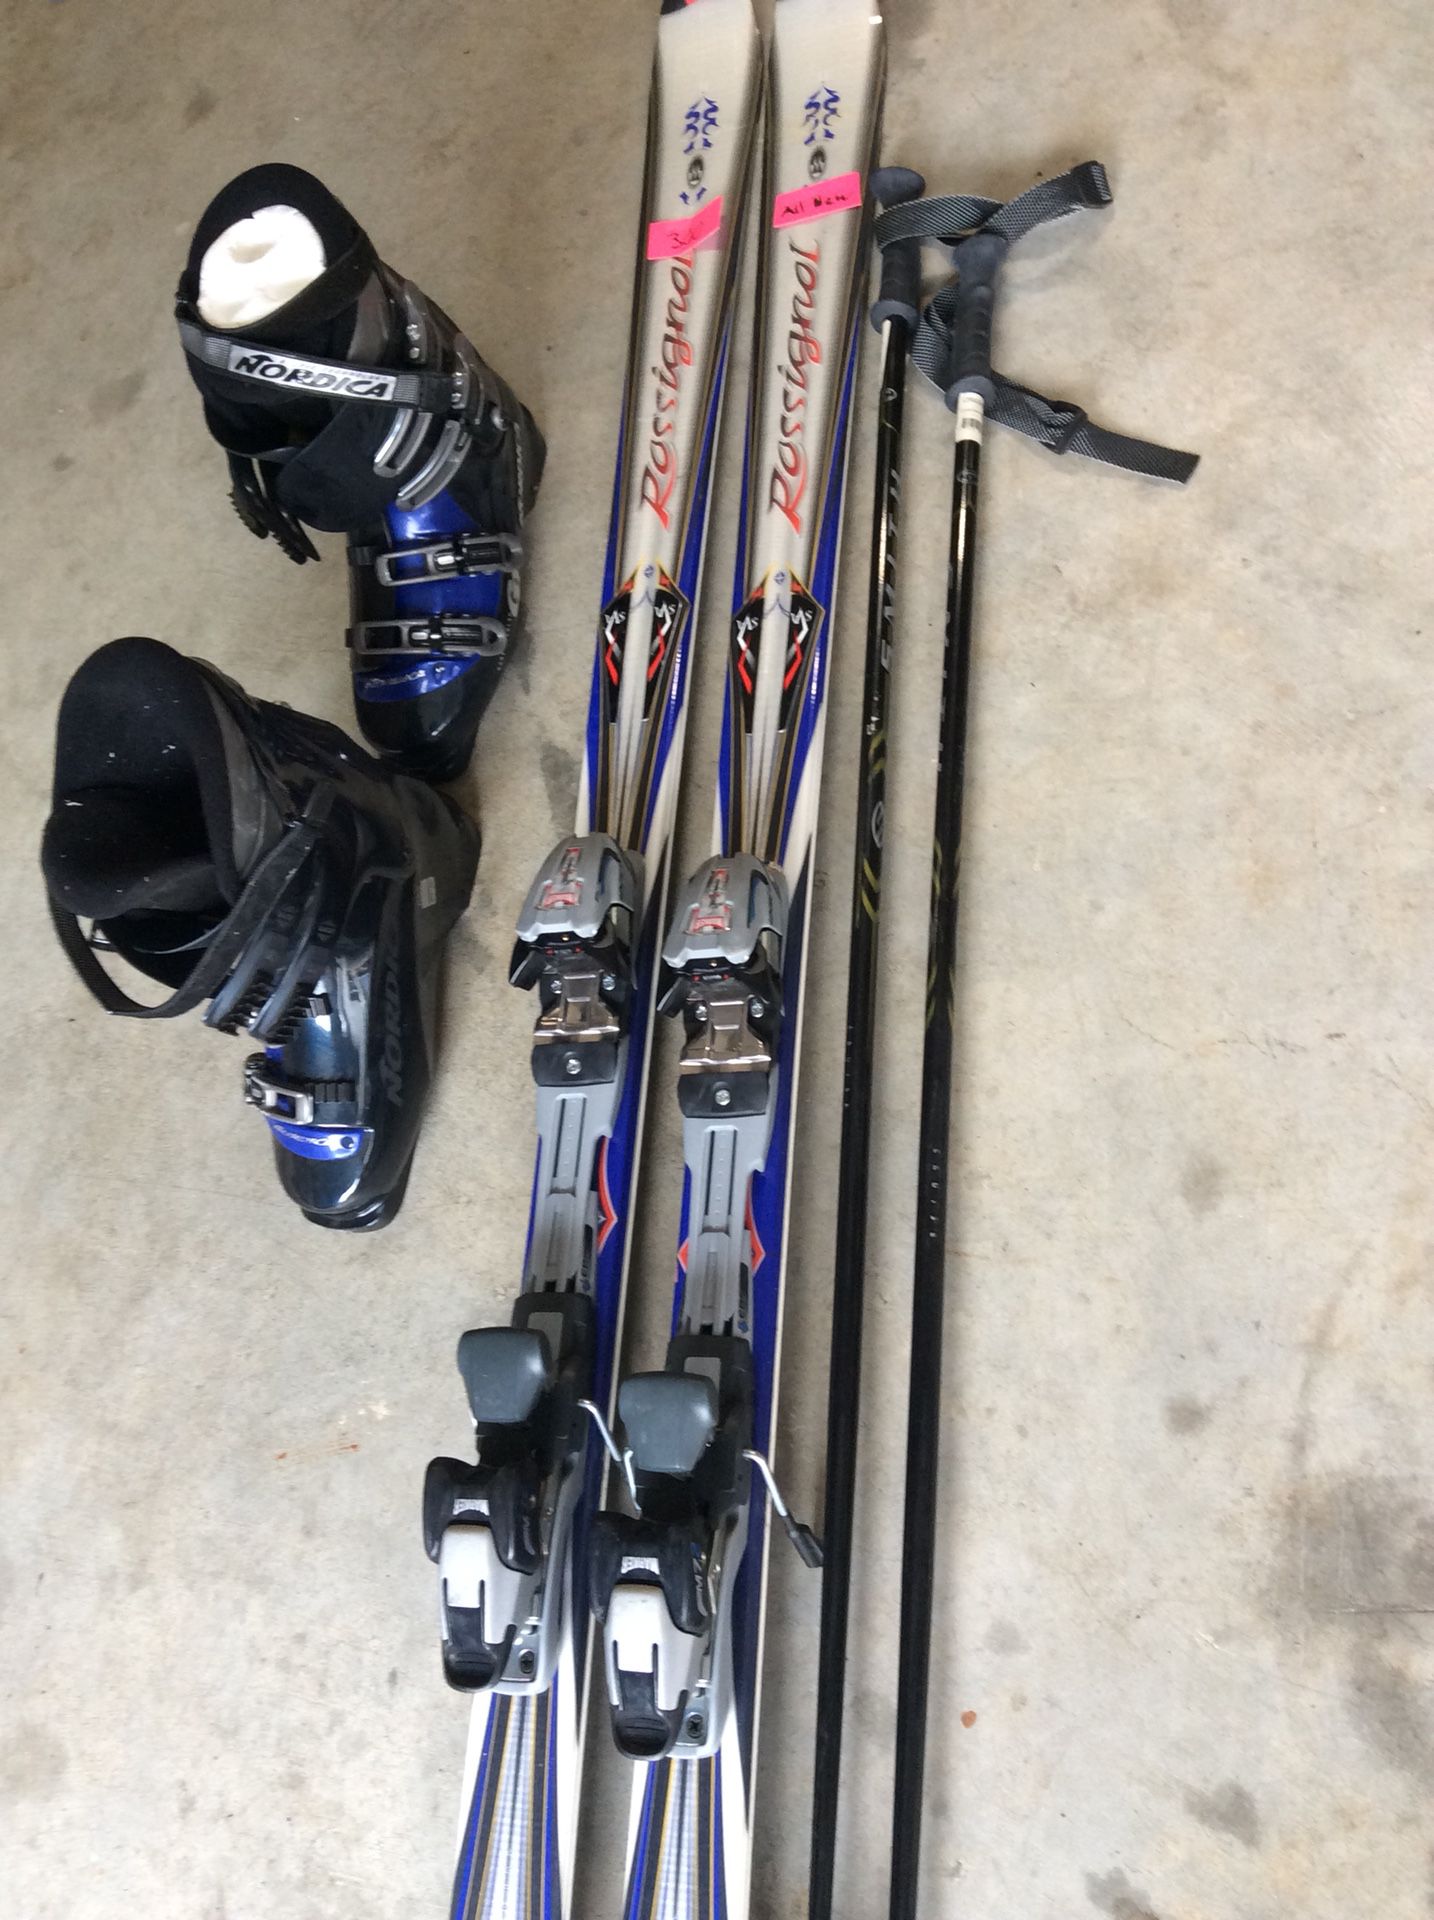 Men’s downhill skis ,boot (size 9) bindings and poles...15 years old but never used.